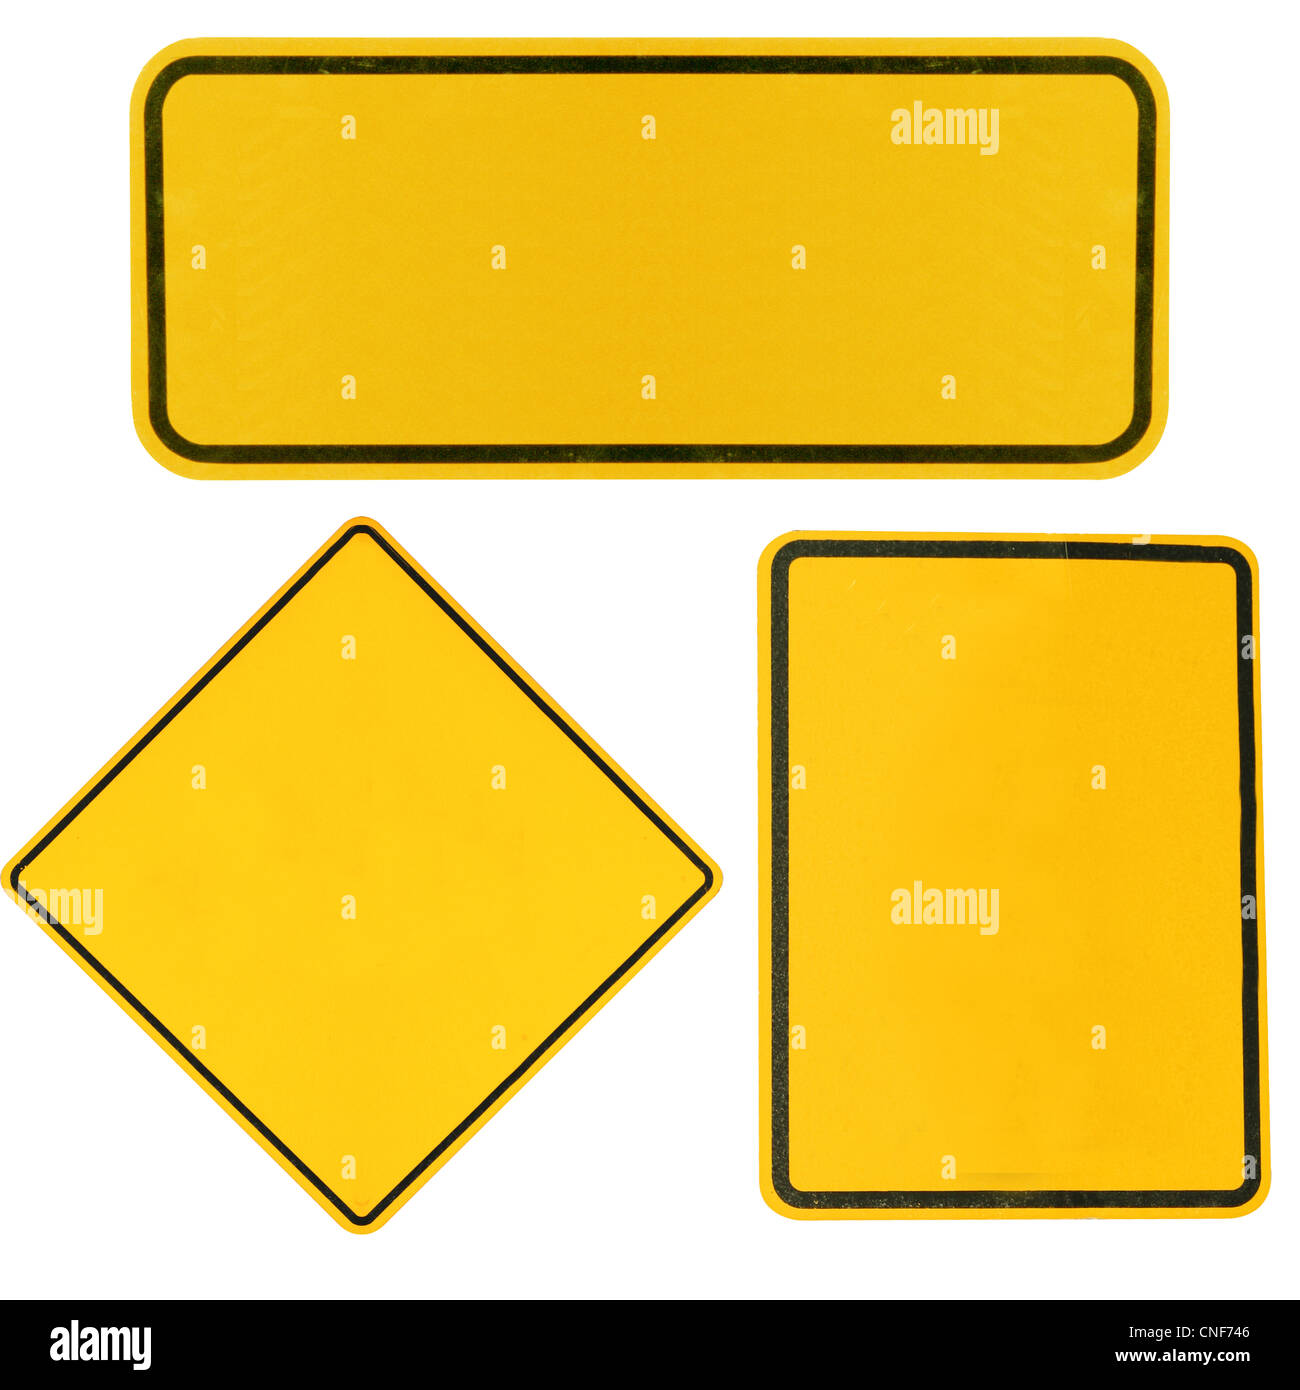 Rectangle road signs Cut Out Stock Images & Pictures - Alamy